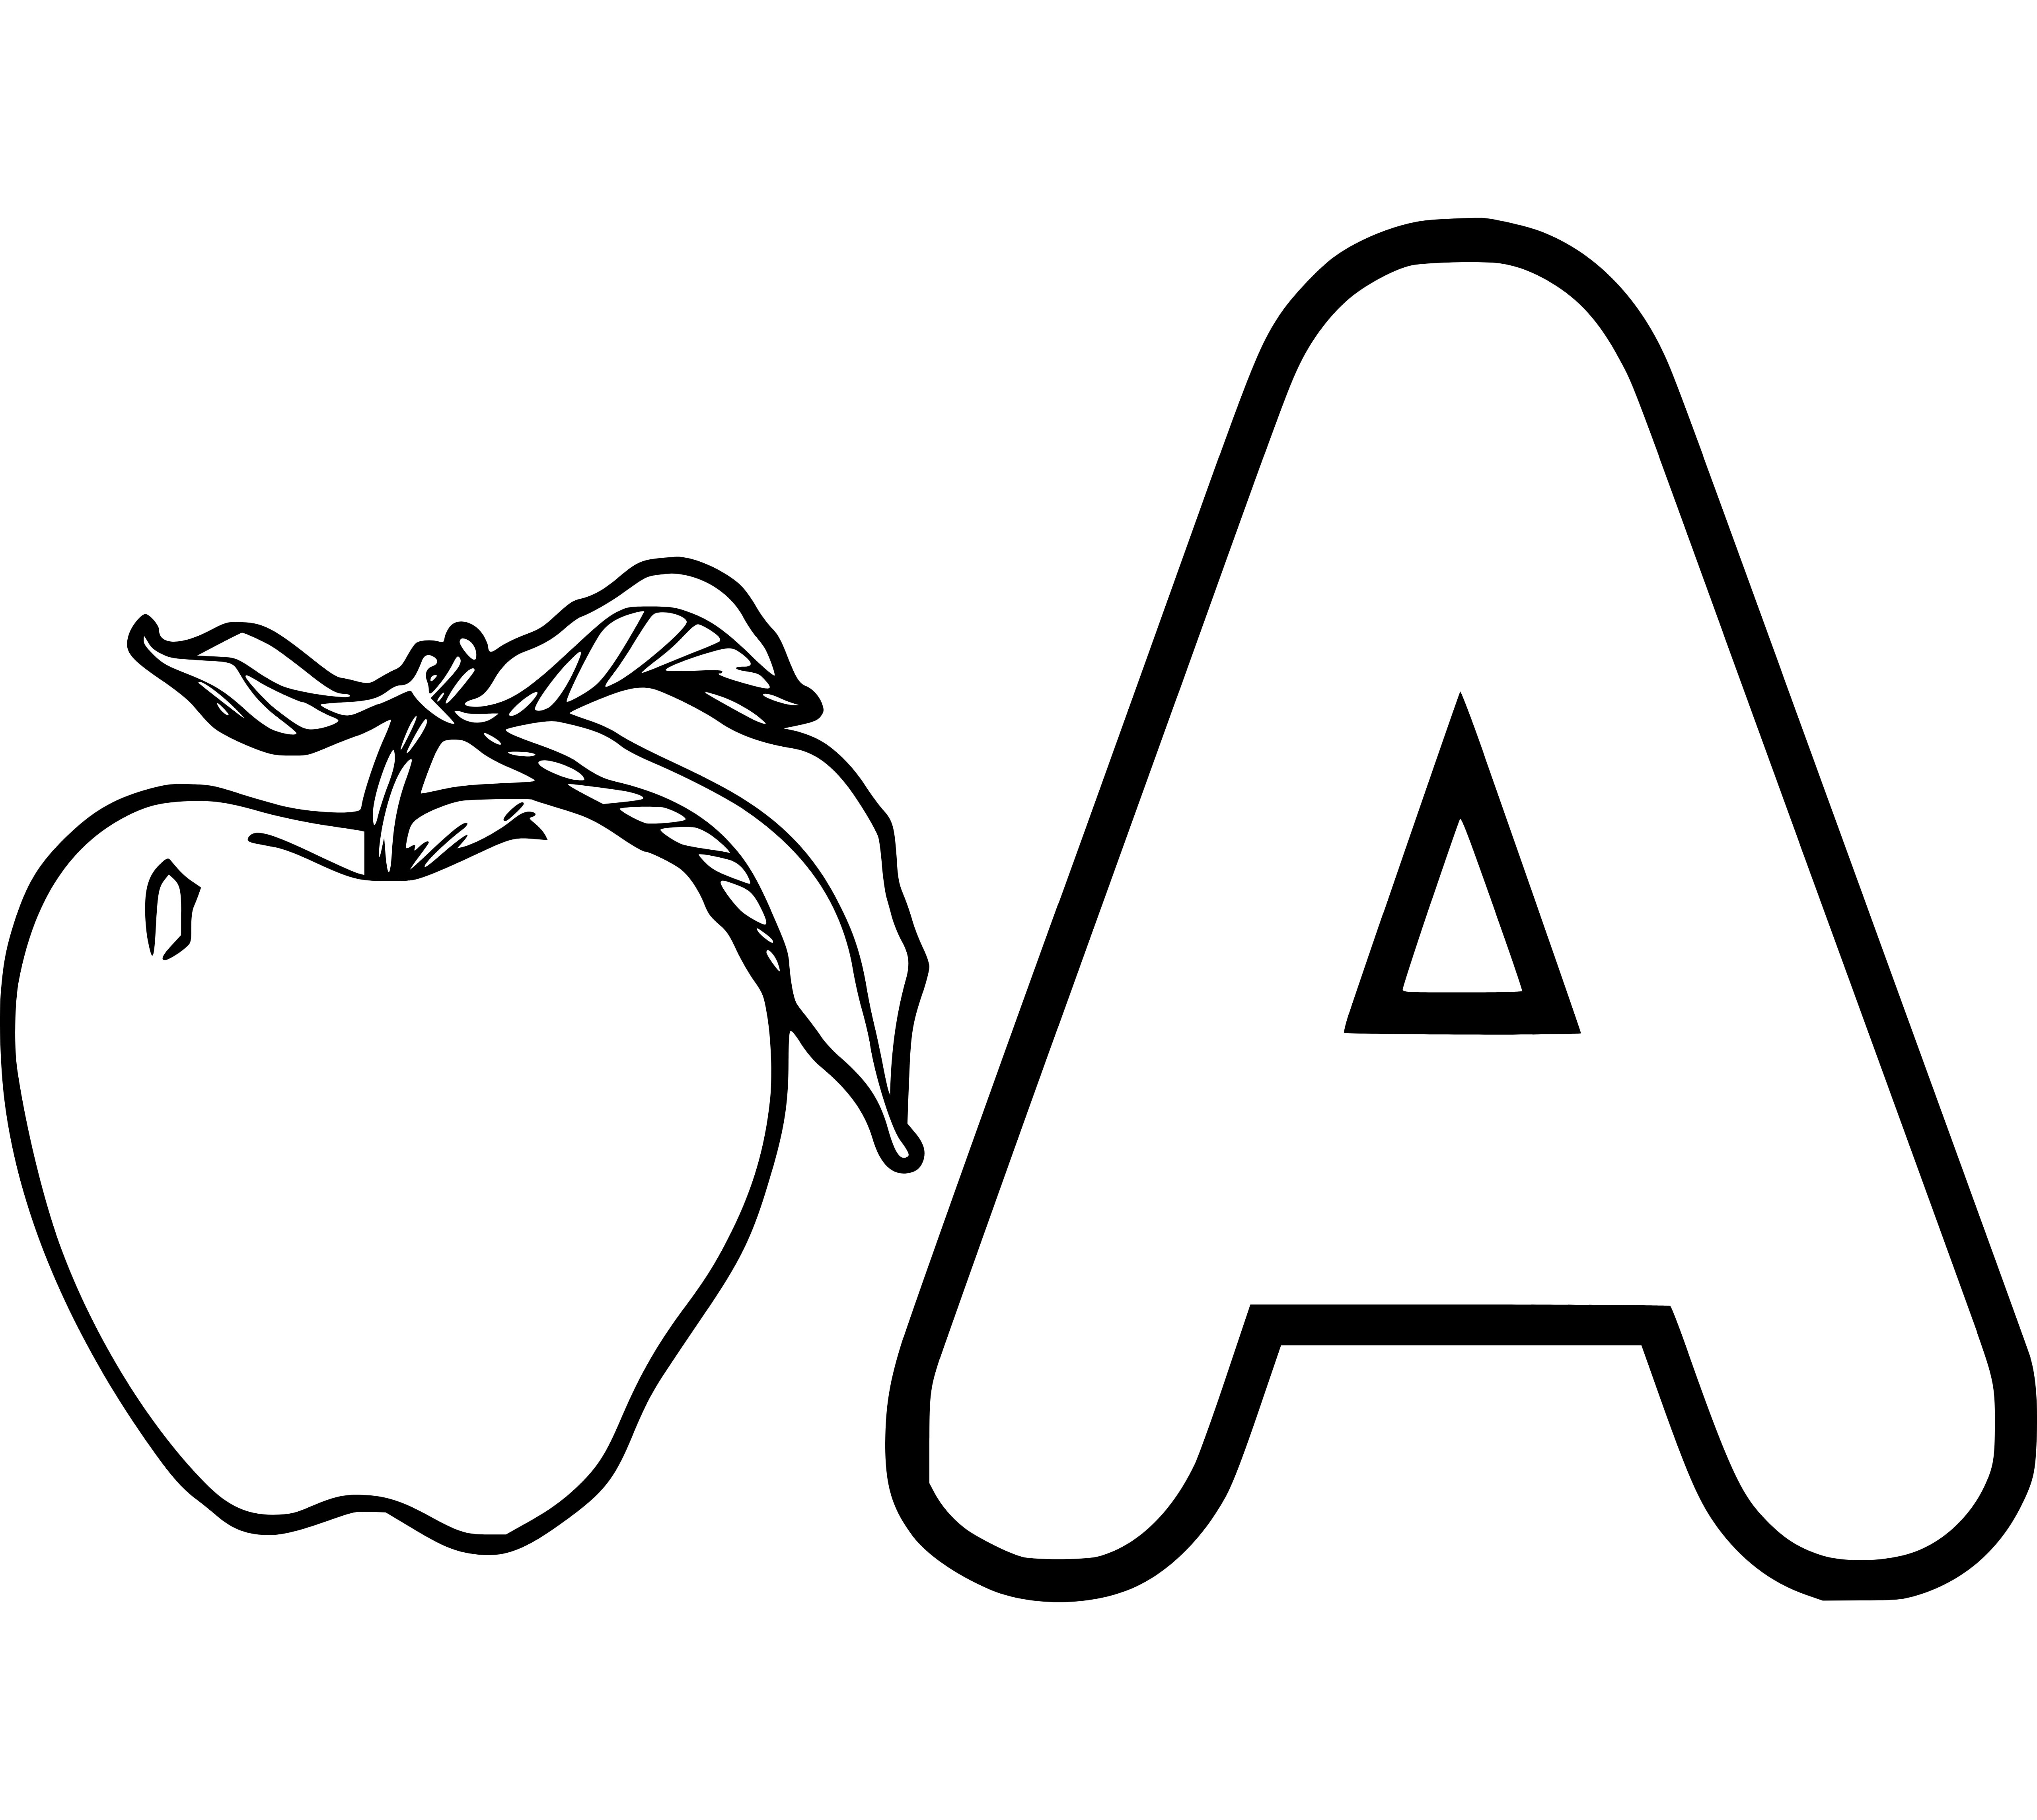 Letter A black and white picture to color for kids - SheetalColor.com